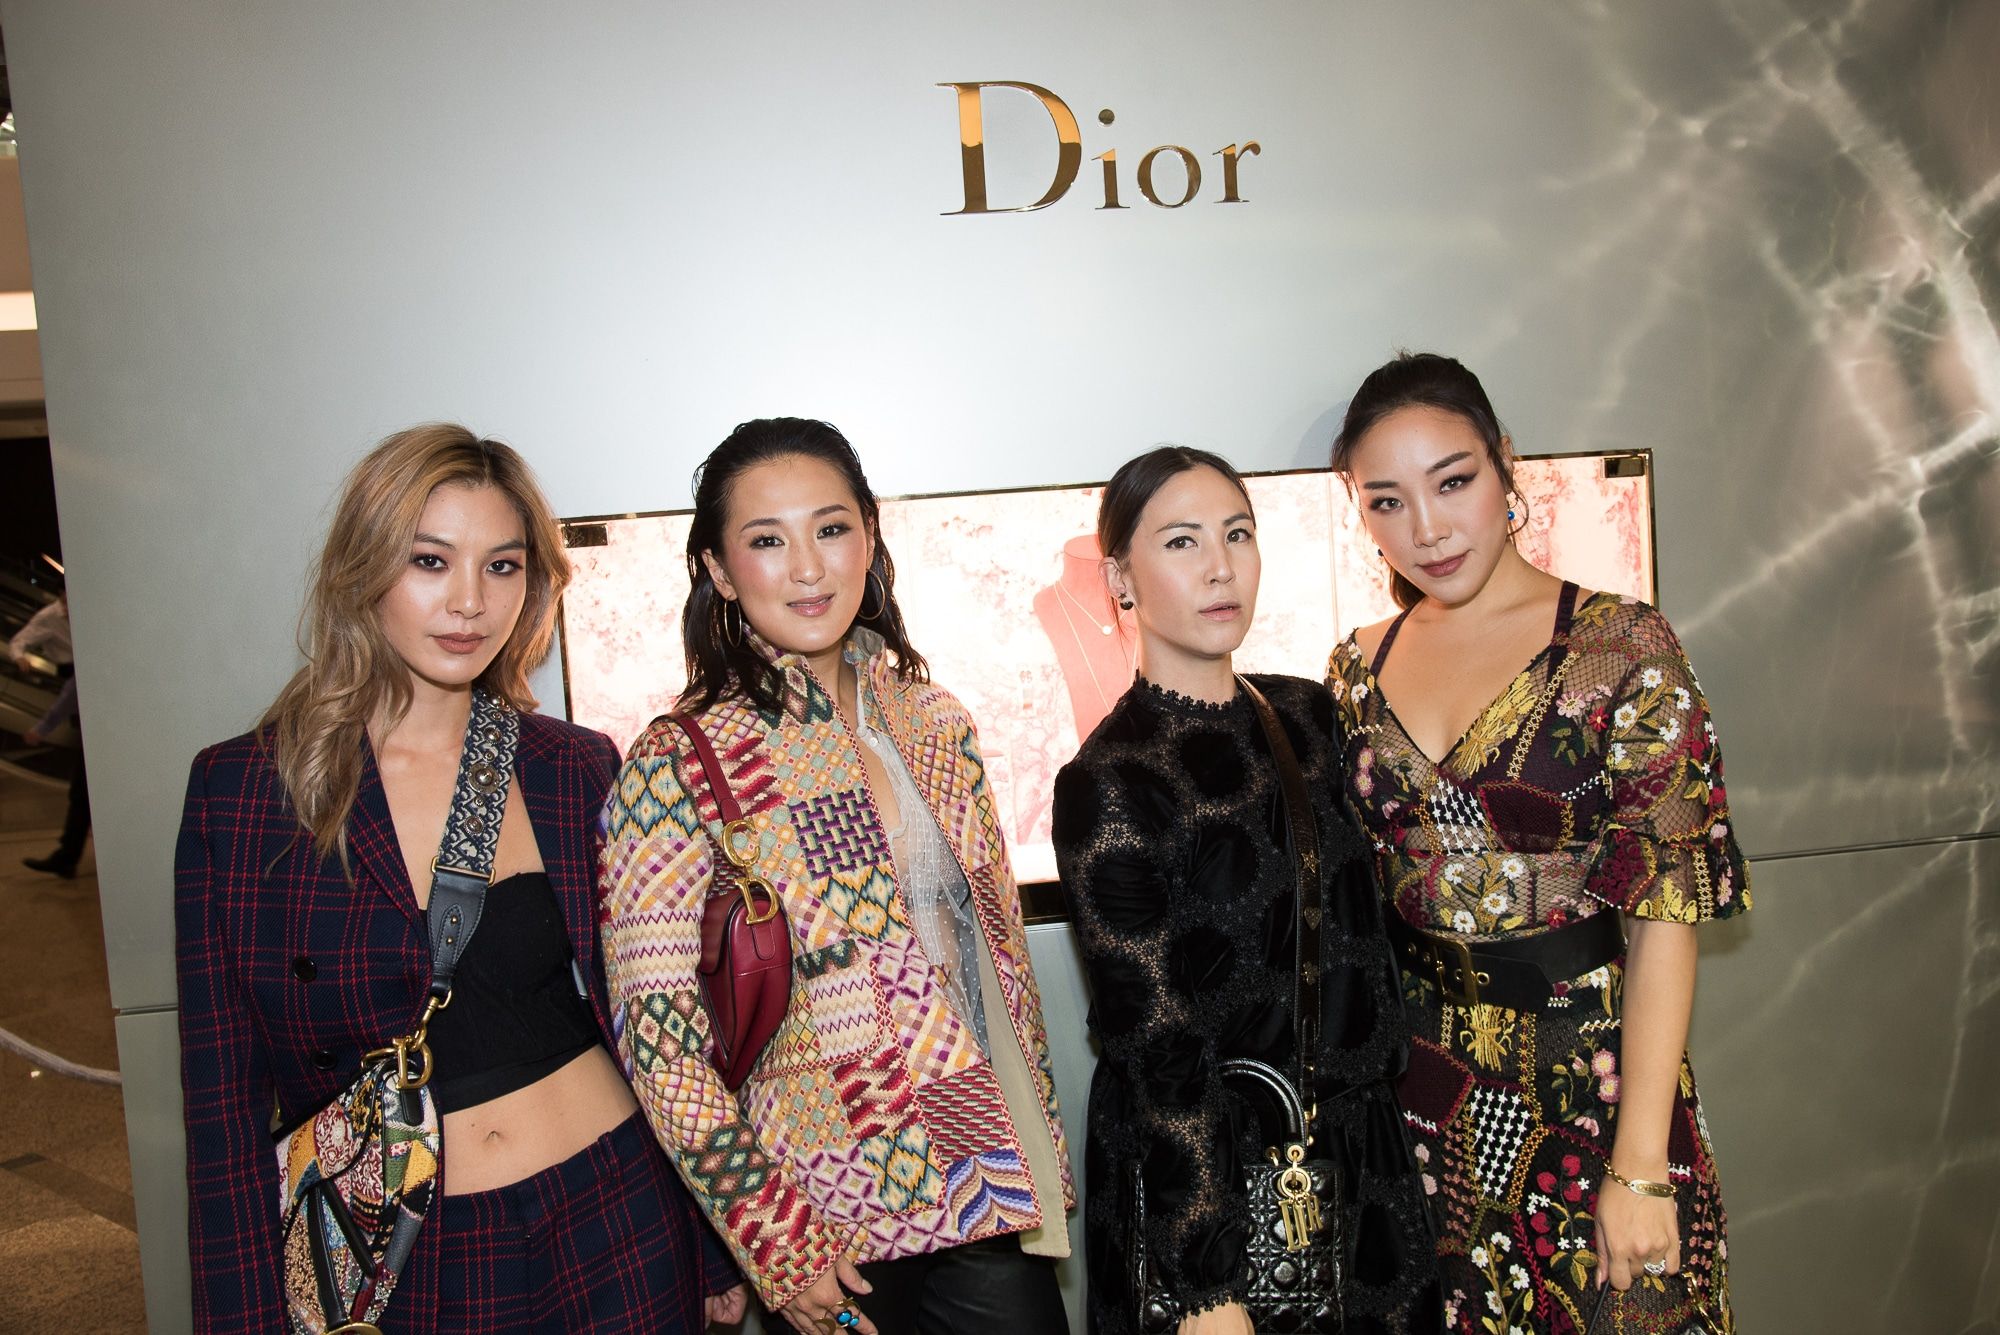 GALLERY: Dior Joaillerie presents updated designs for Rose des Vents  collection